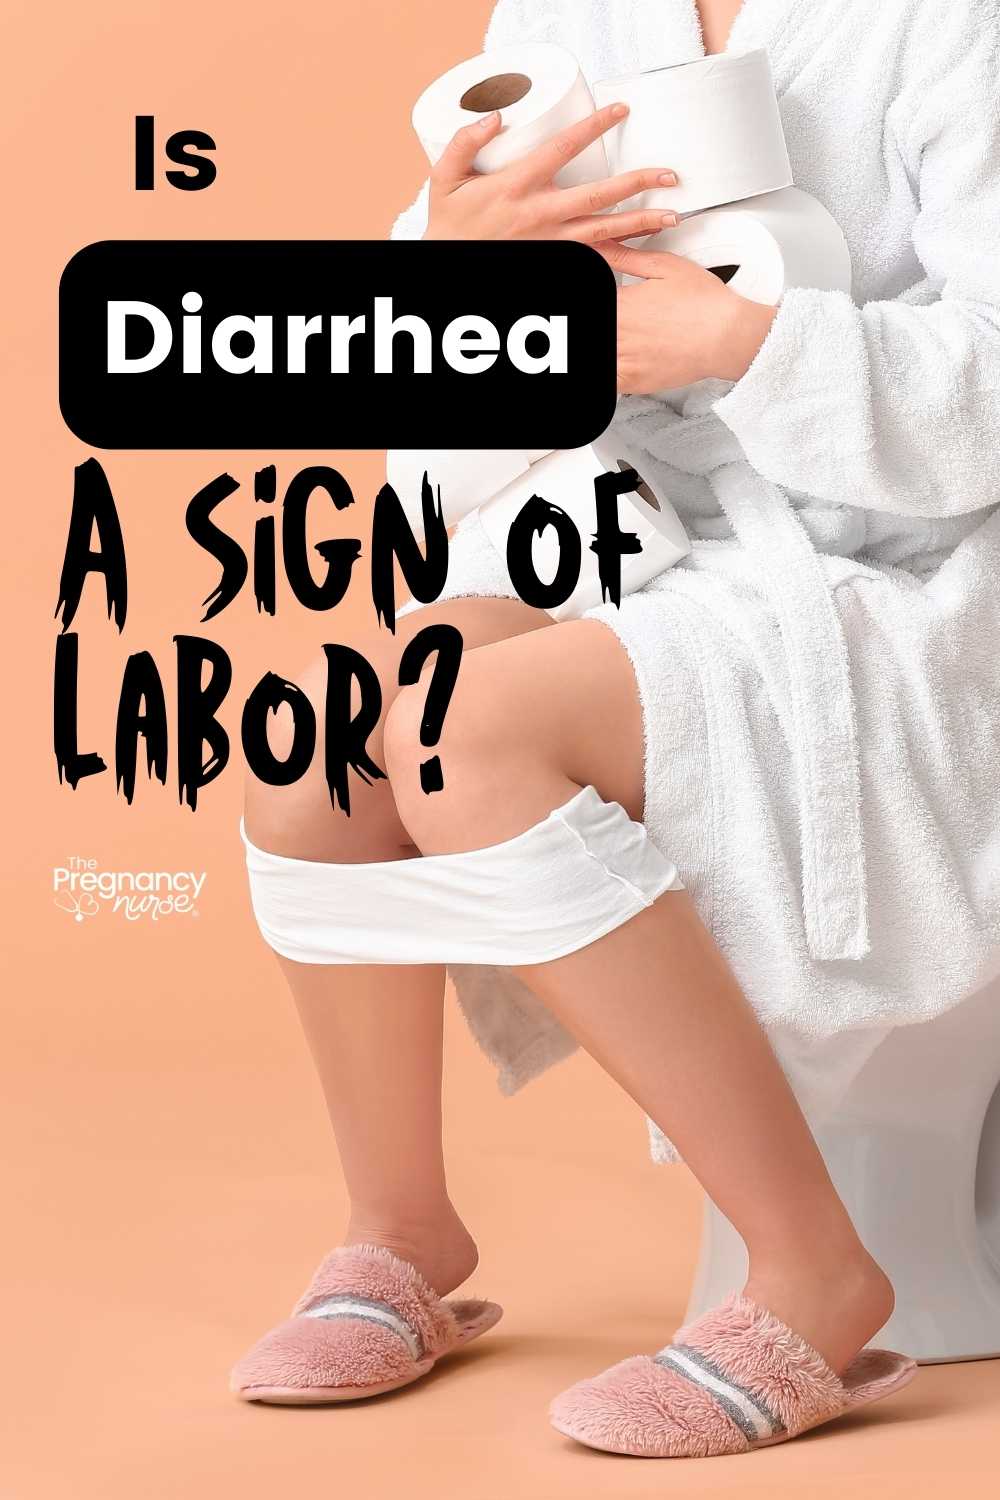 Navigating pregnancy comes with uncertainty, especially as you approach your due date. Join us on the journey of understanding labor signs at 38 weeks pregnant. From decoding signals like diarrhea to other subtle changes, we've got your questions covered! Empower your pregnancy experience with tips and insights right here.